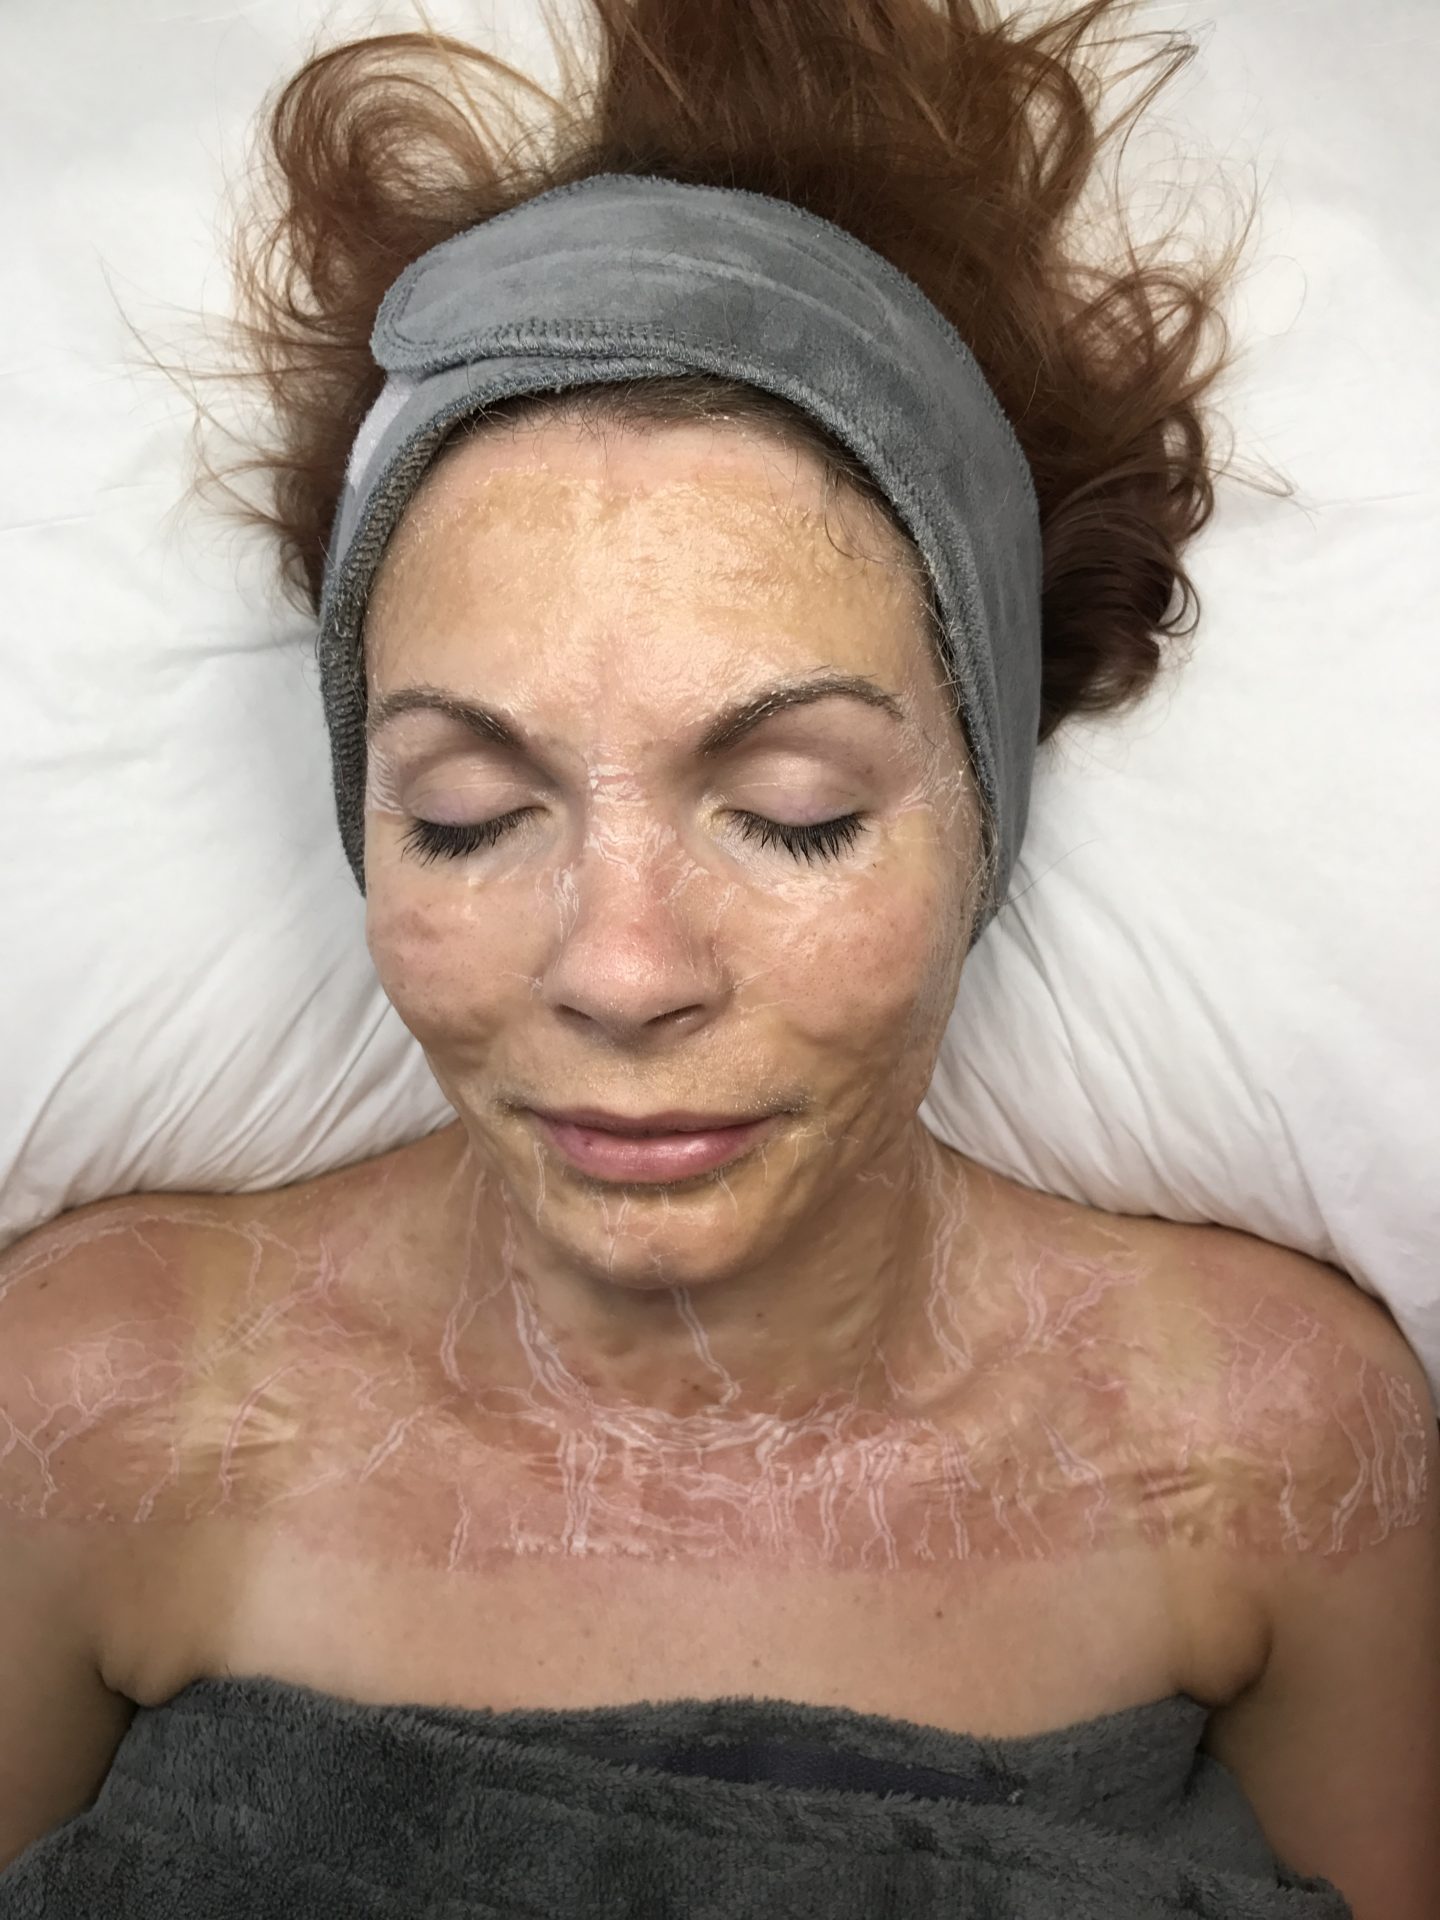 DMK Enzyme Therapy Facial Skin Aspirations